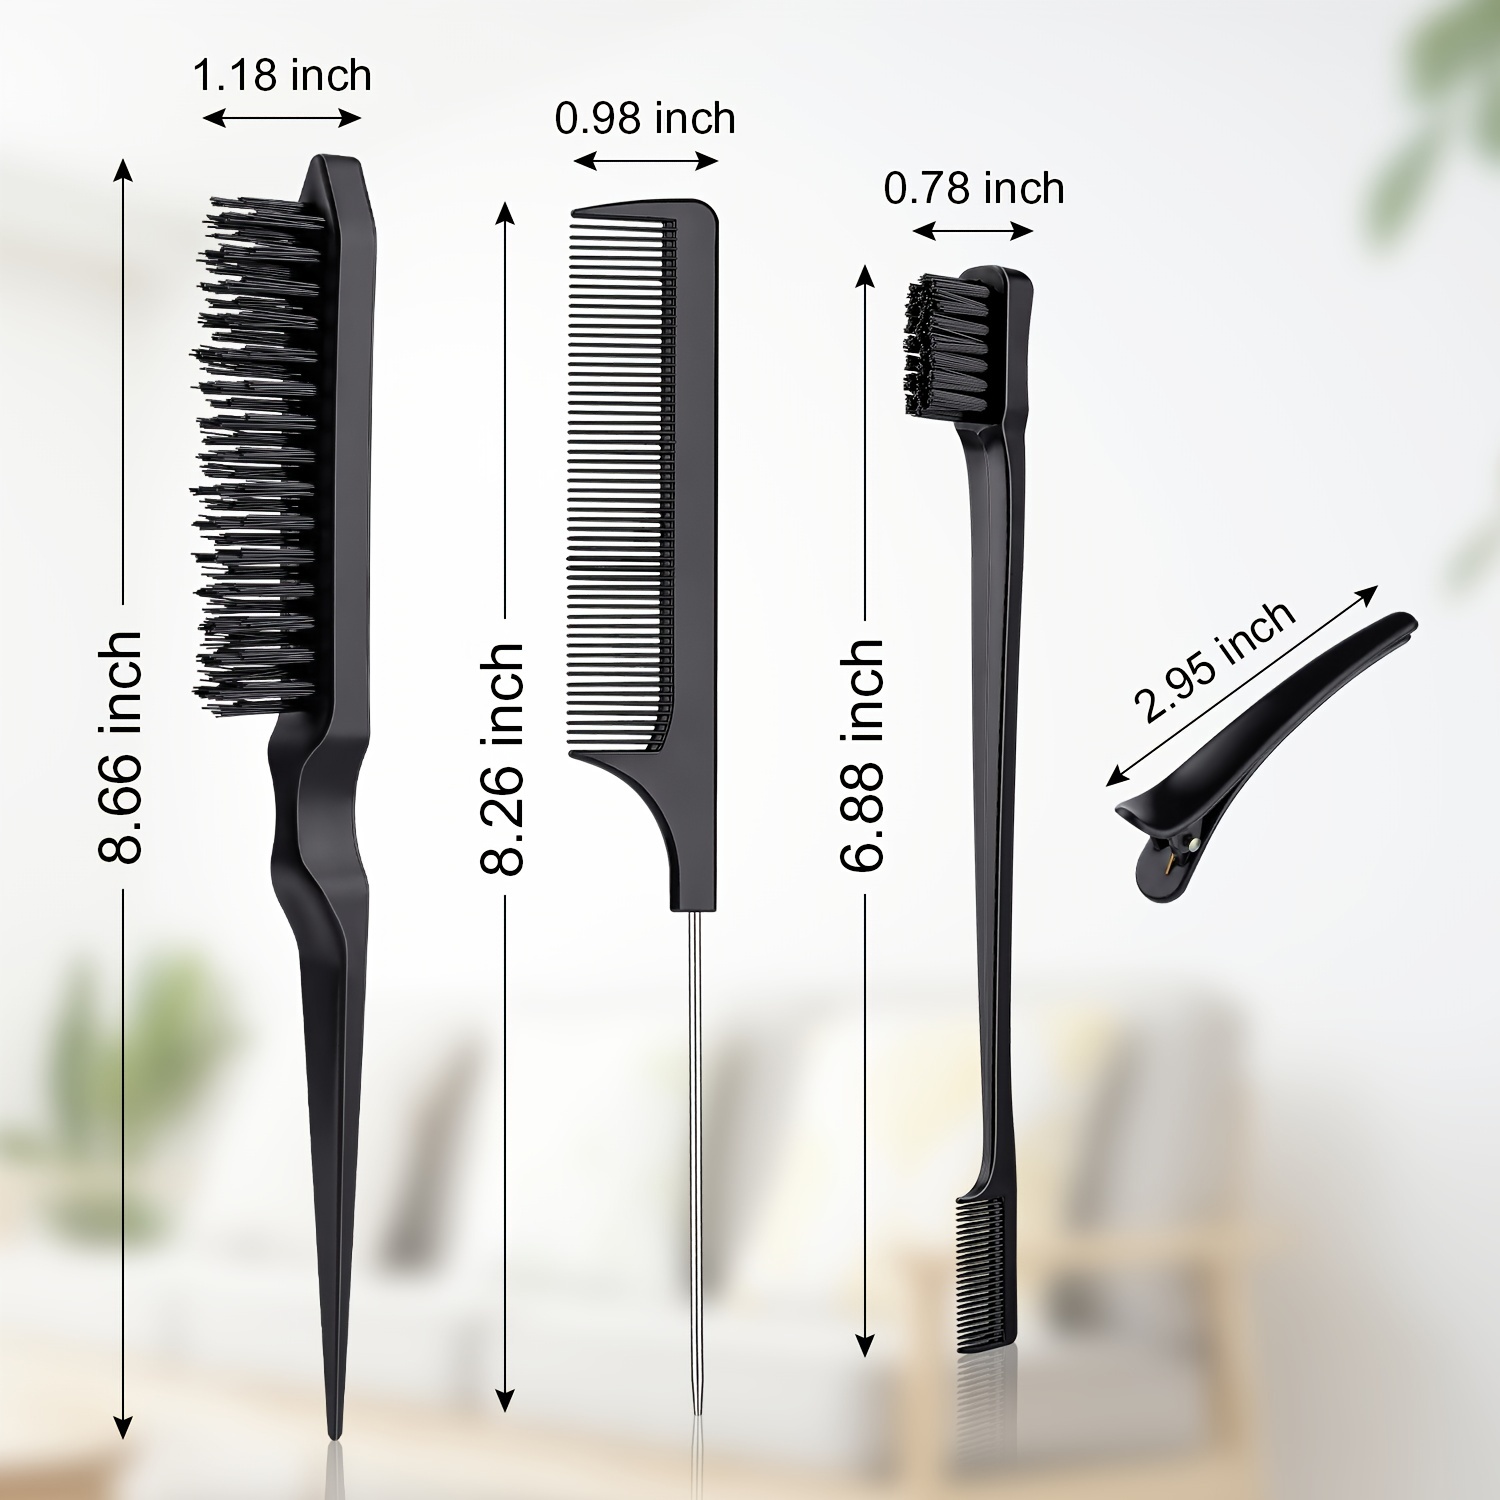 Amazon.com : Styling Hair Comb 11PCS Professional Styling Comb Set for  Women Men, Rat Tail Combs Wide Tooth Comb for Curly Hair, Salon Combs for  Women Parting Comb Set for All Hair